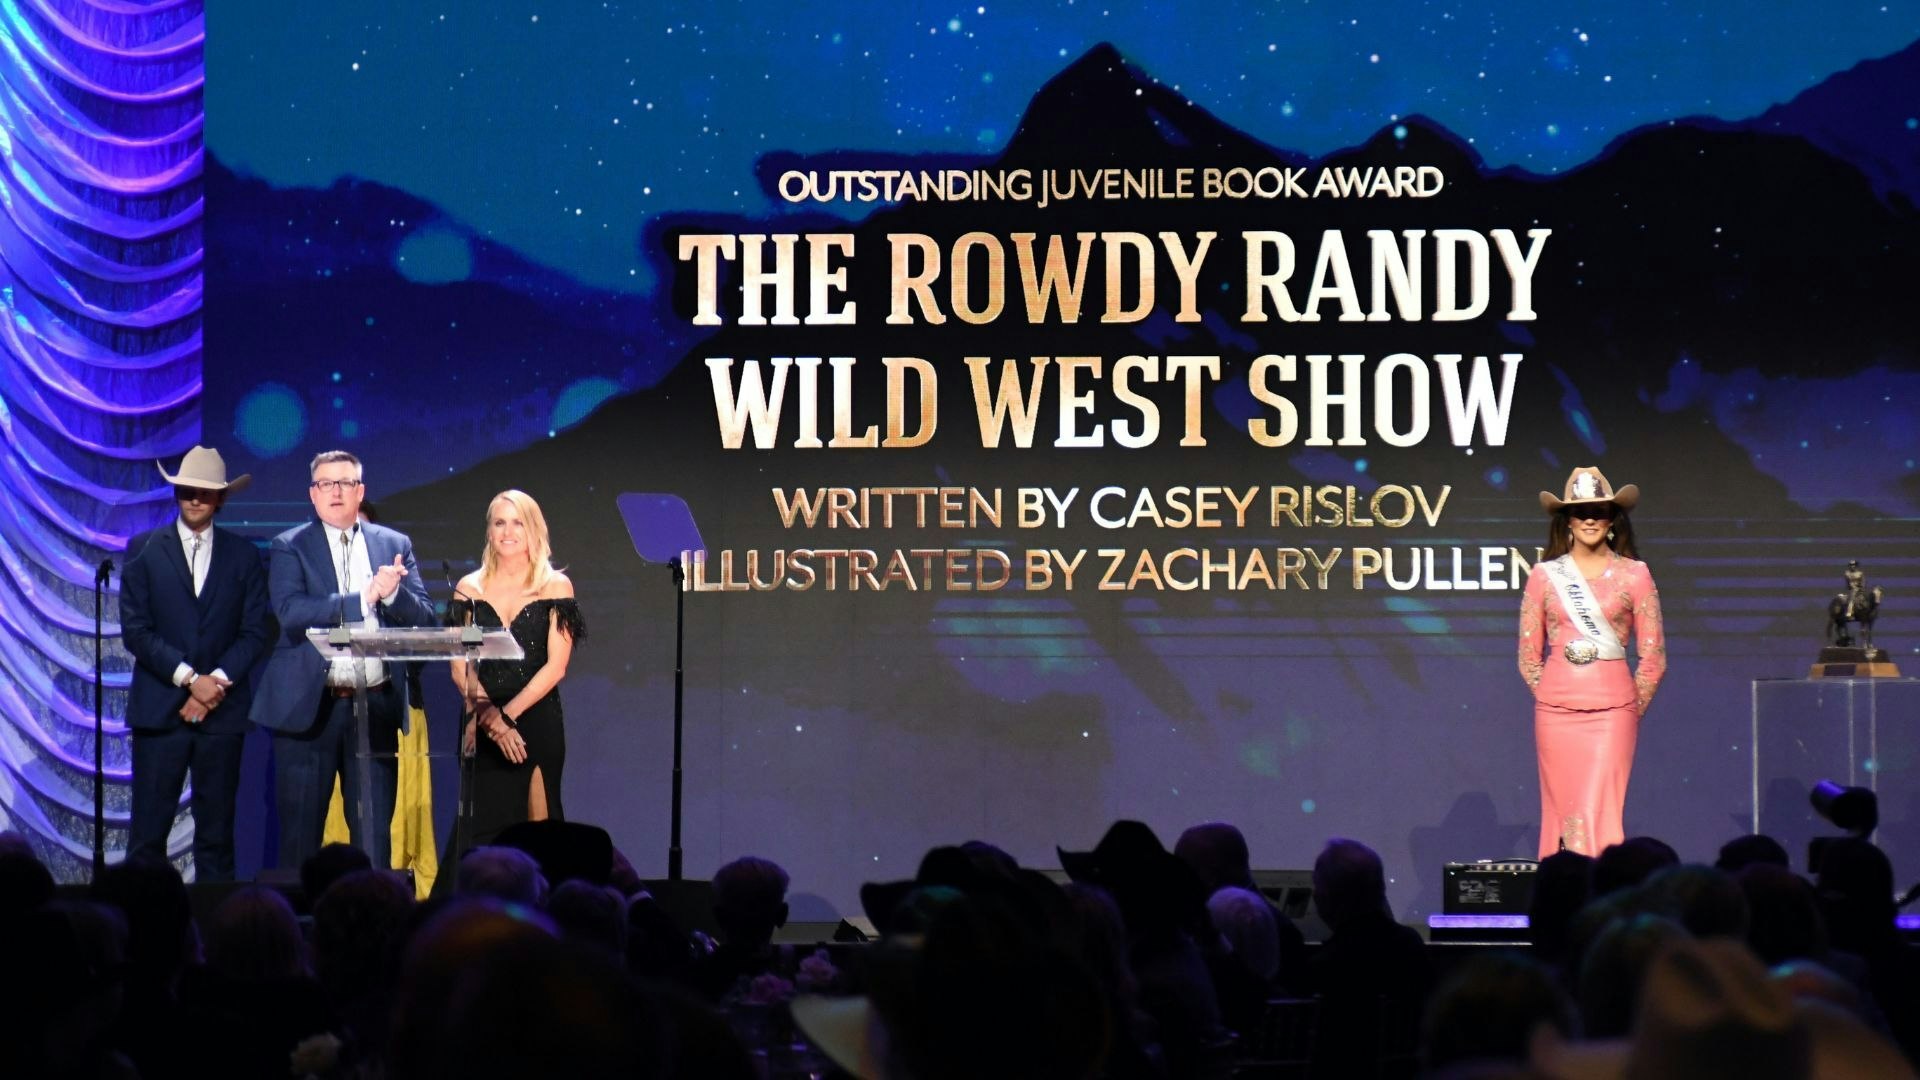 Casey Rislov and Zachary Pullen wrote and illustrated "The Rowdy Randy Wild West Show," which was awarded Outstanding Juvenile Book at the recent Western Heritage Awards.